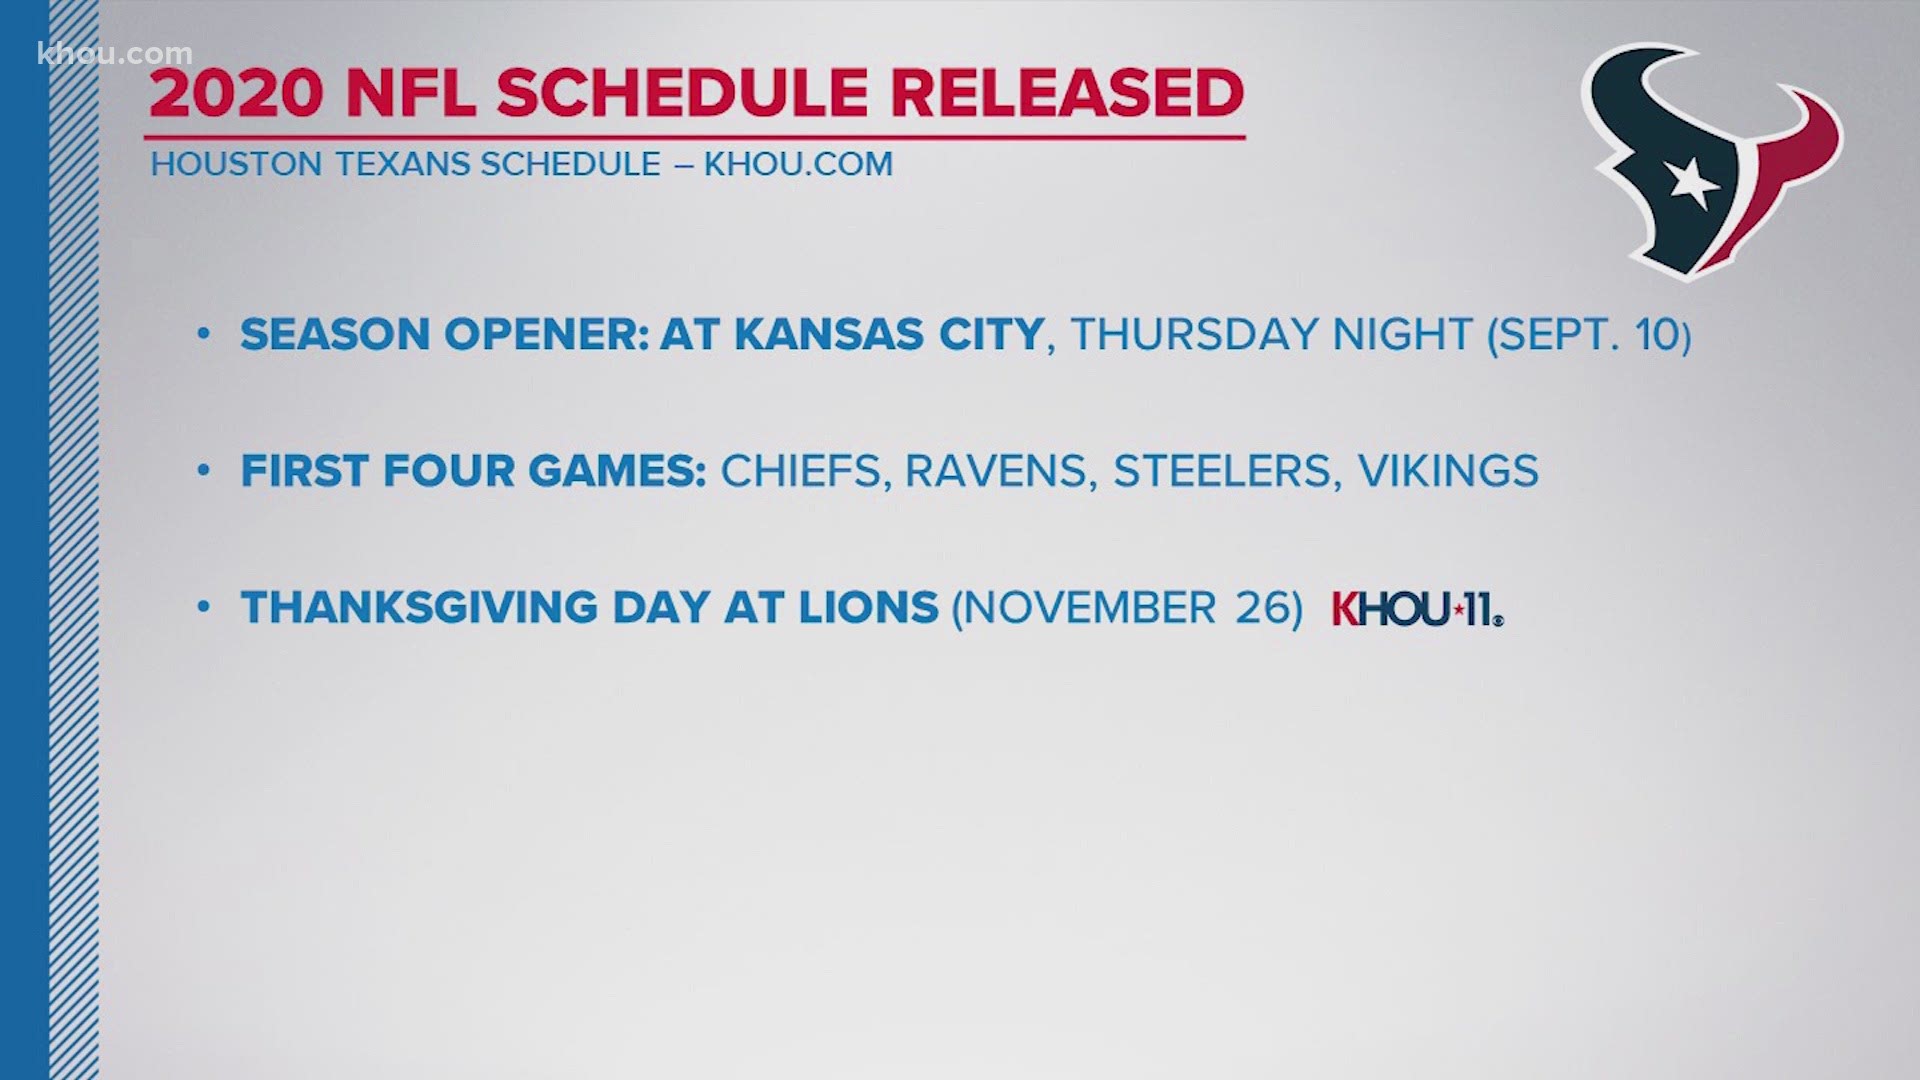 The Texans opening the season by facing the Super Bowl-winning Kansas City Chiefs to open the season on Thursday Night Football on Sept. 10.